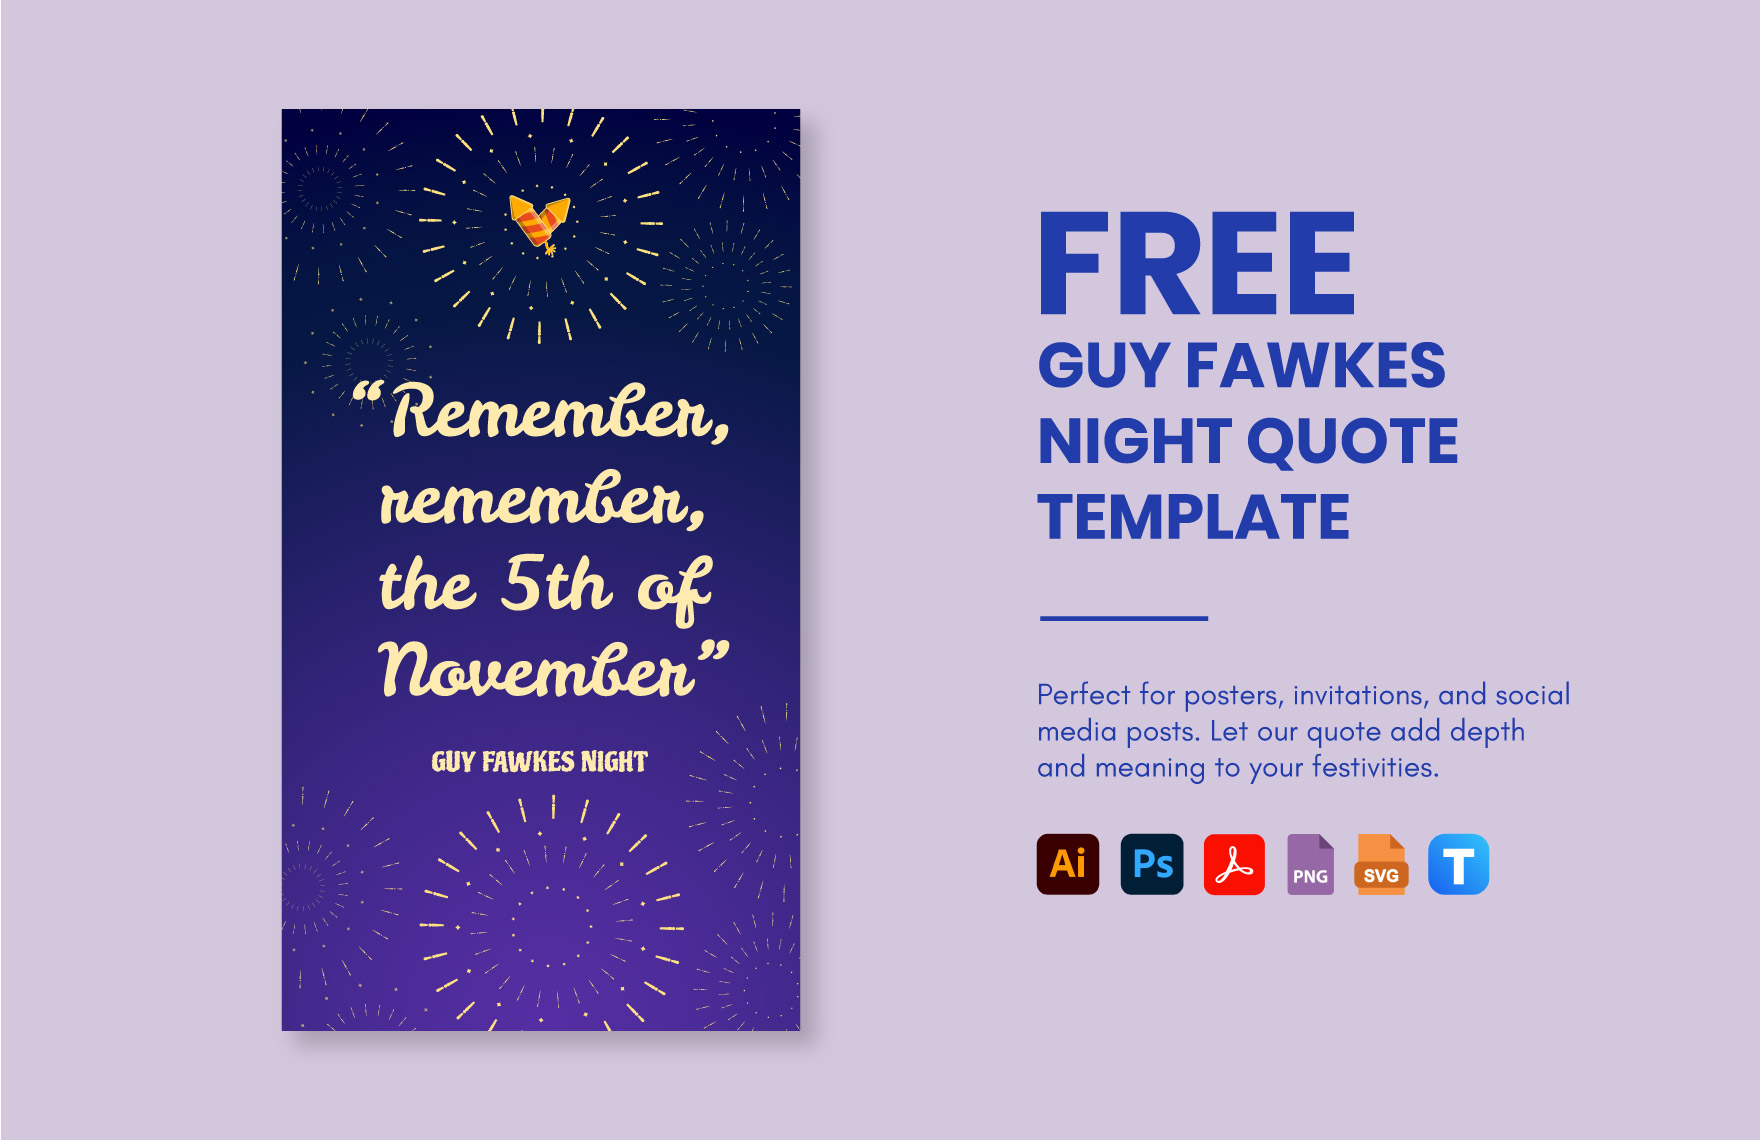 Free Guy Fawkes Night Quote  in PDF, Illustrator, PSD, SVG, PNG